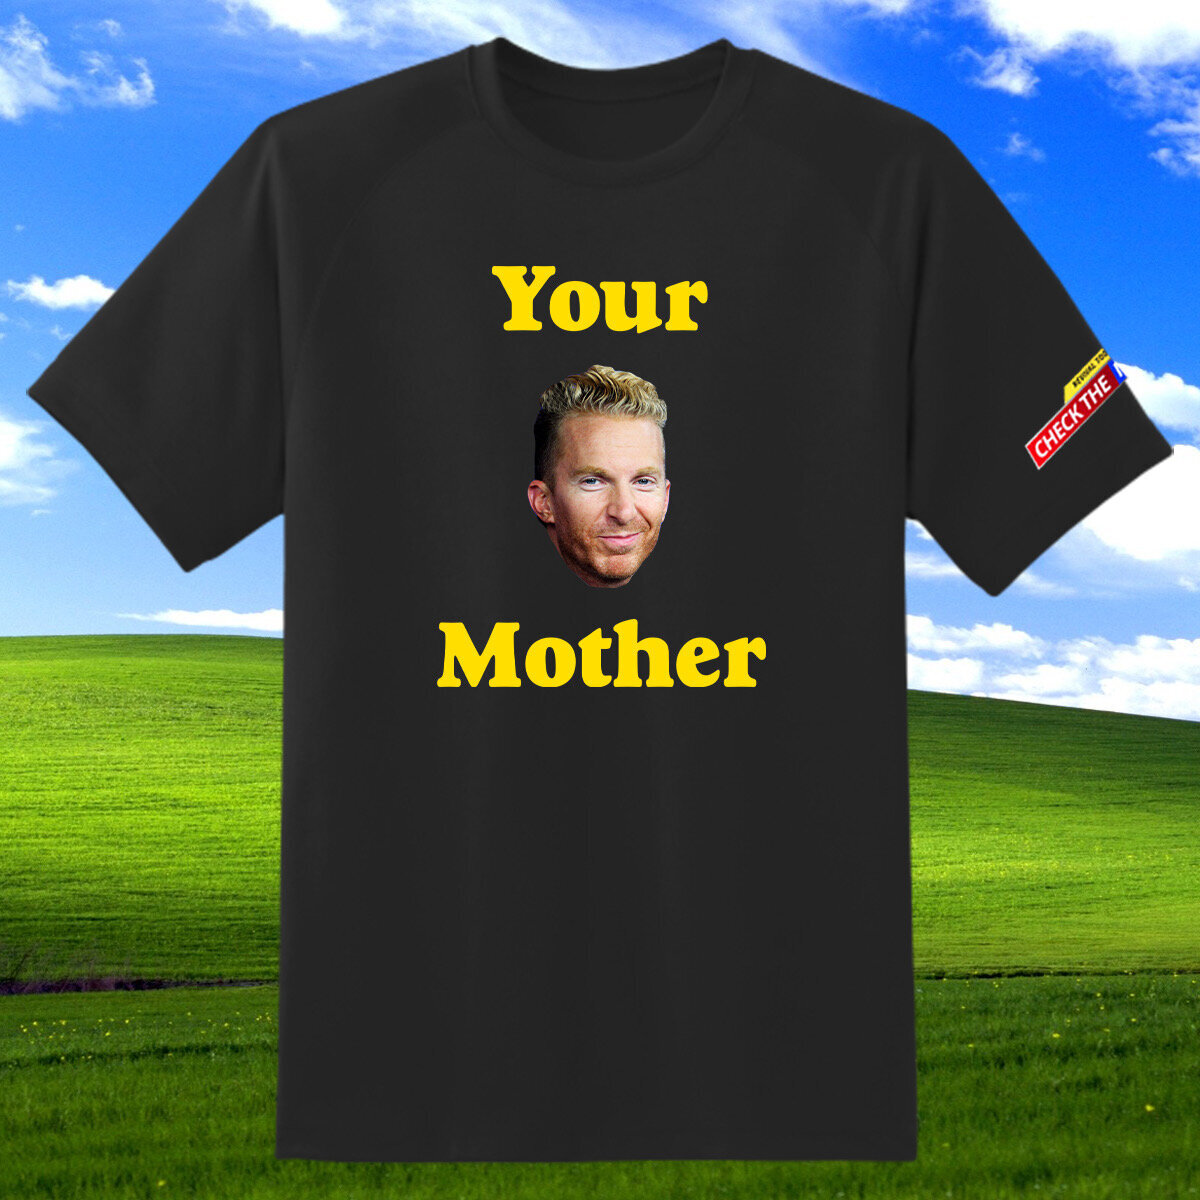 Your Mother square copy